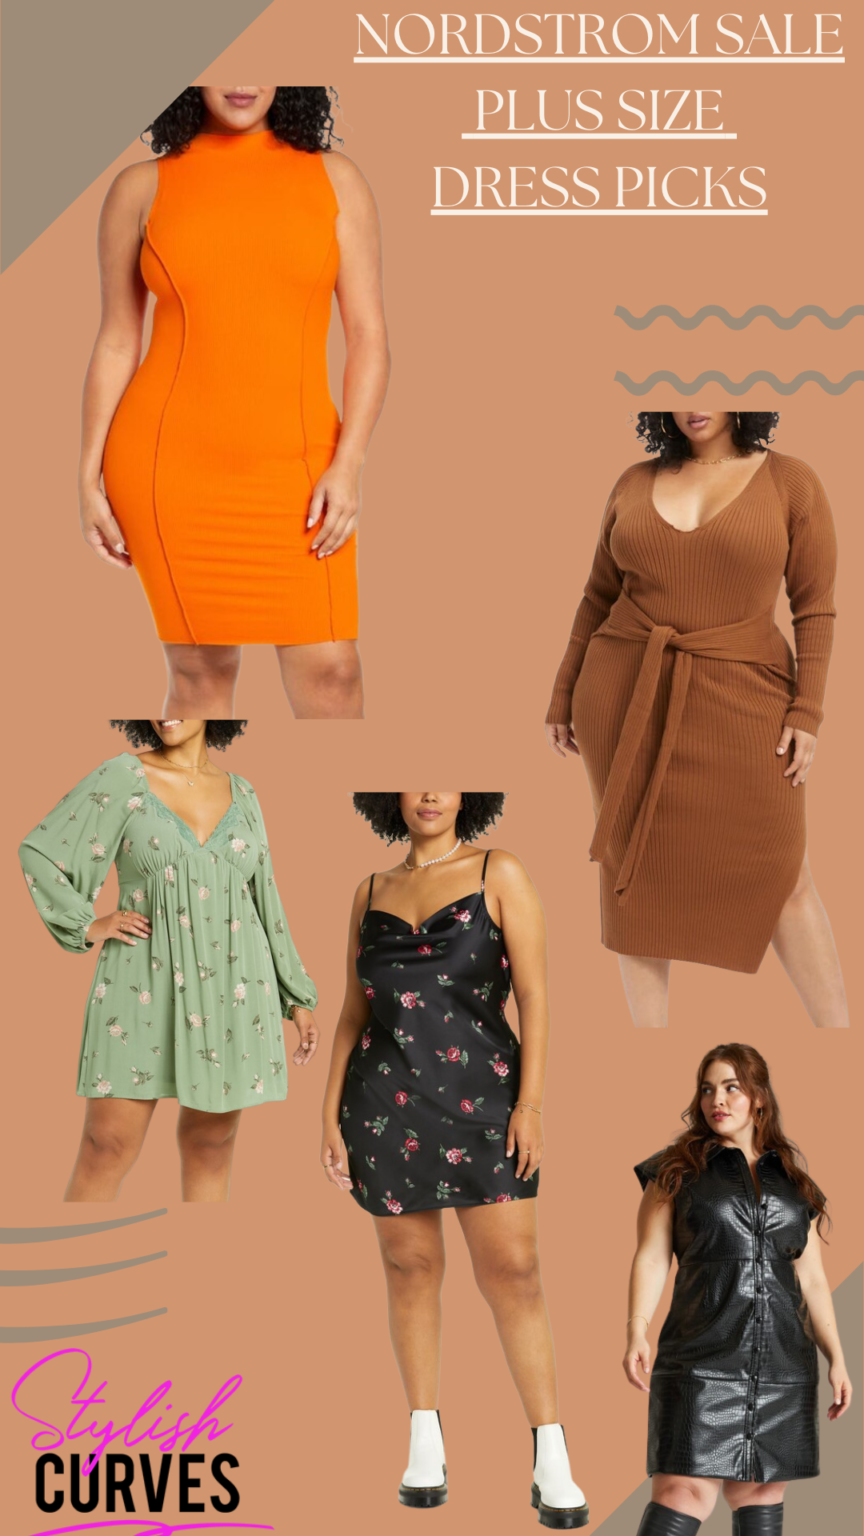 Over 20+ Nordstrom Plus Size Clothing Looks From The Anniversary Sale